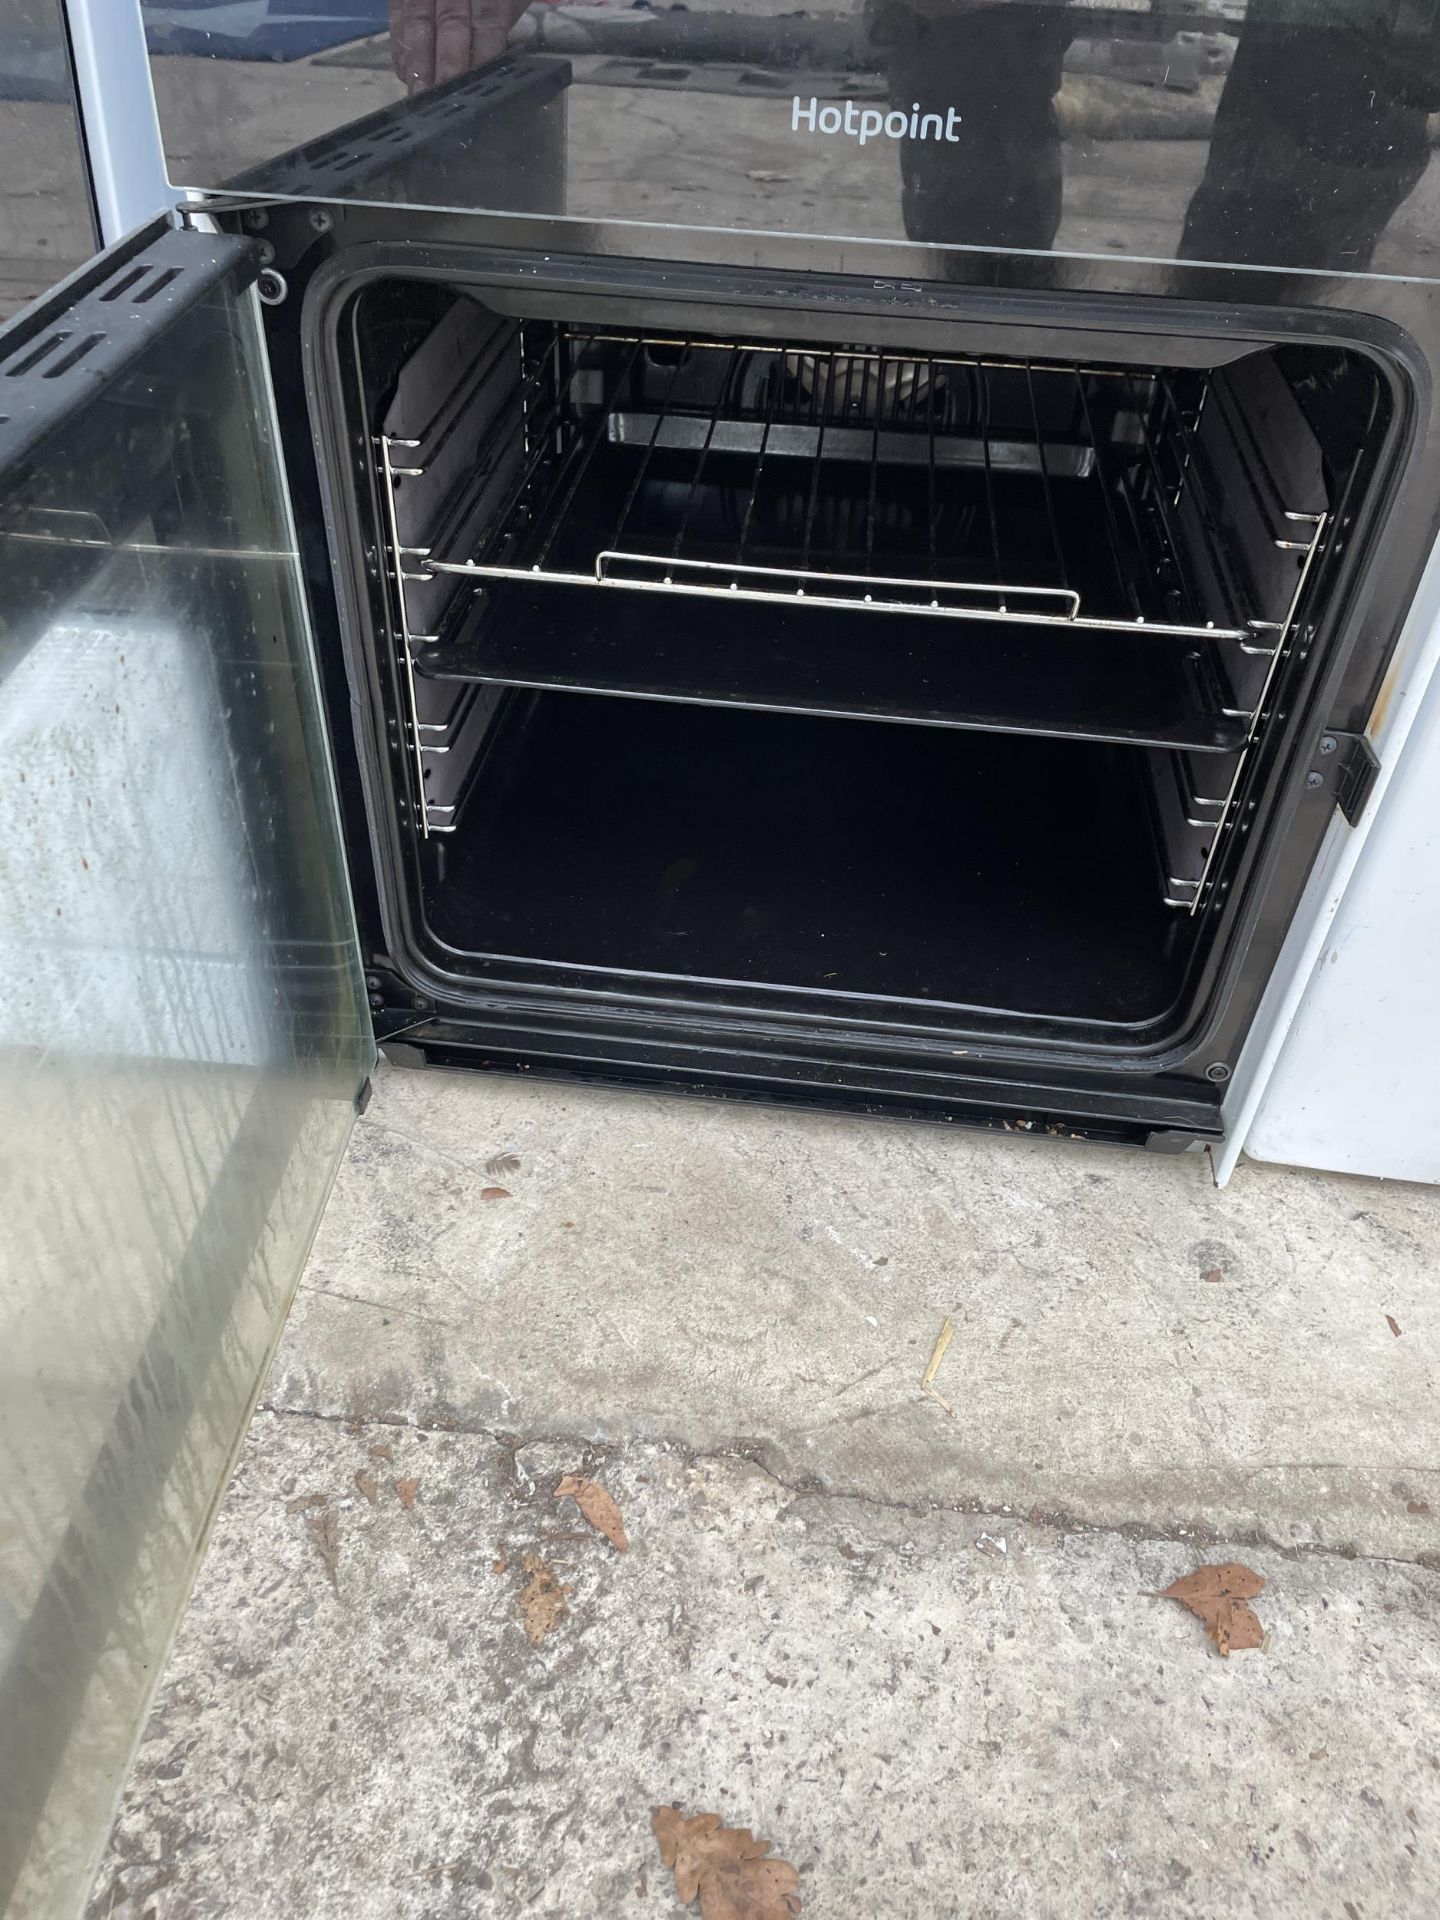 A WHITE AND BLACK HOTPOINT ELECTRIC OVEN AND HOB BELIEVED IN WORKING ORDER BUT NO WARRANTY - Image 2 of 4